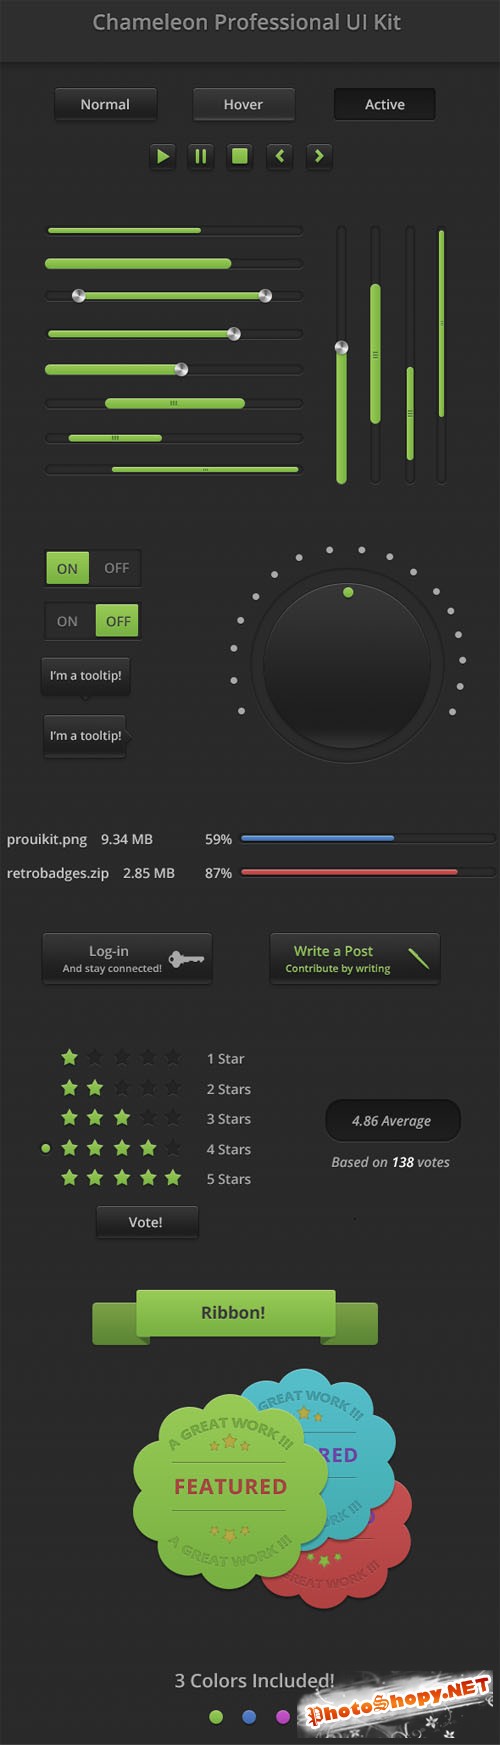 Chameleon Professional User Interface PSD Template